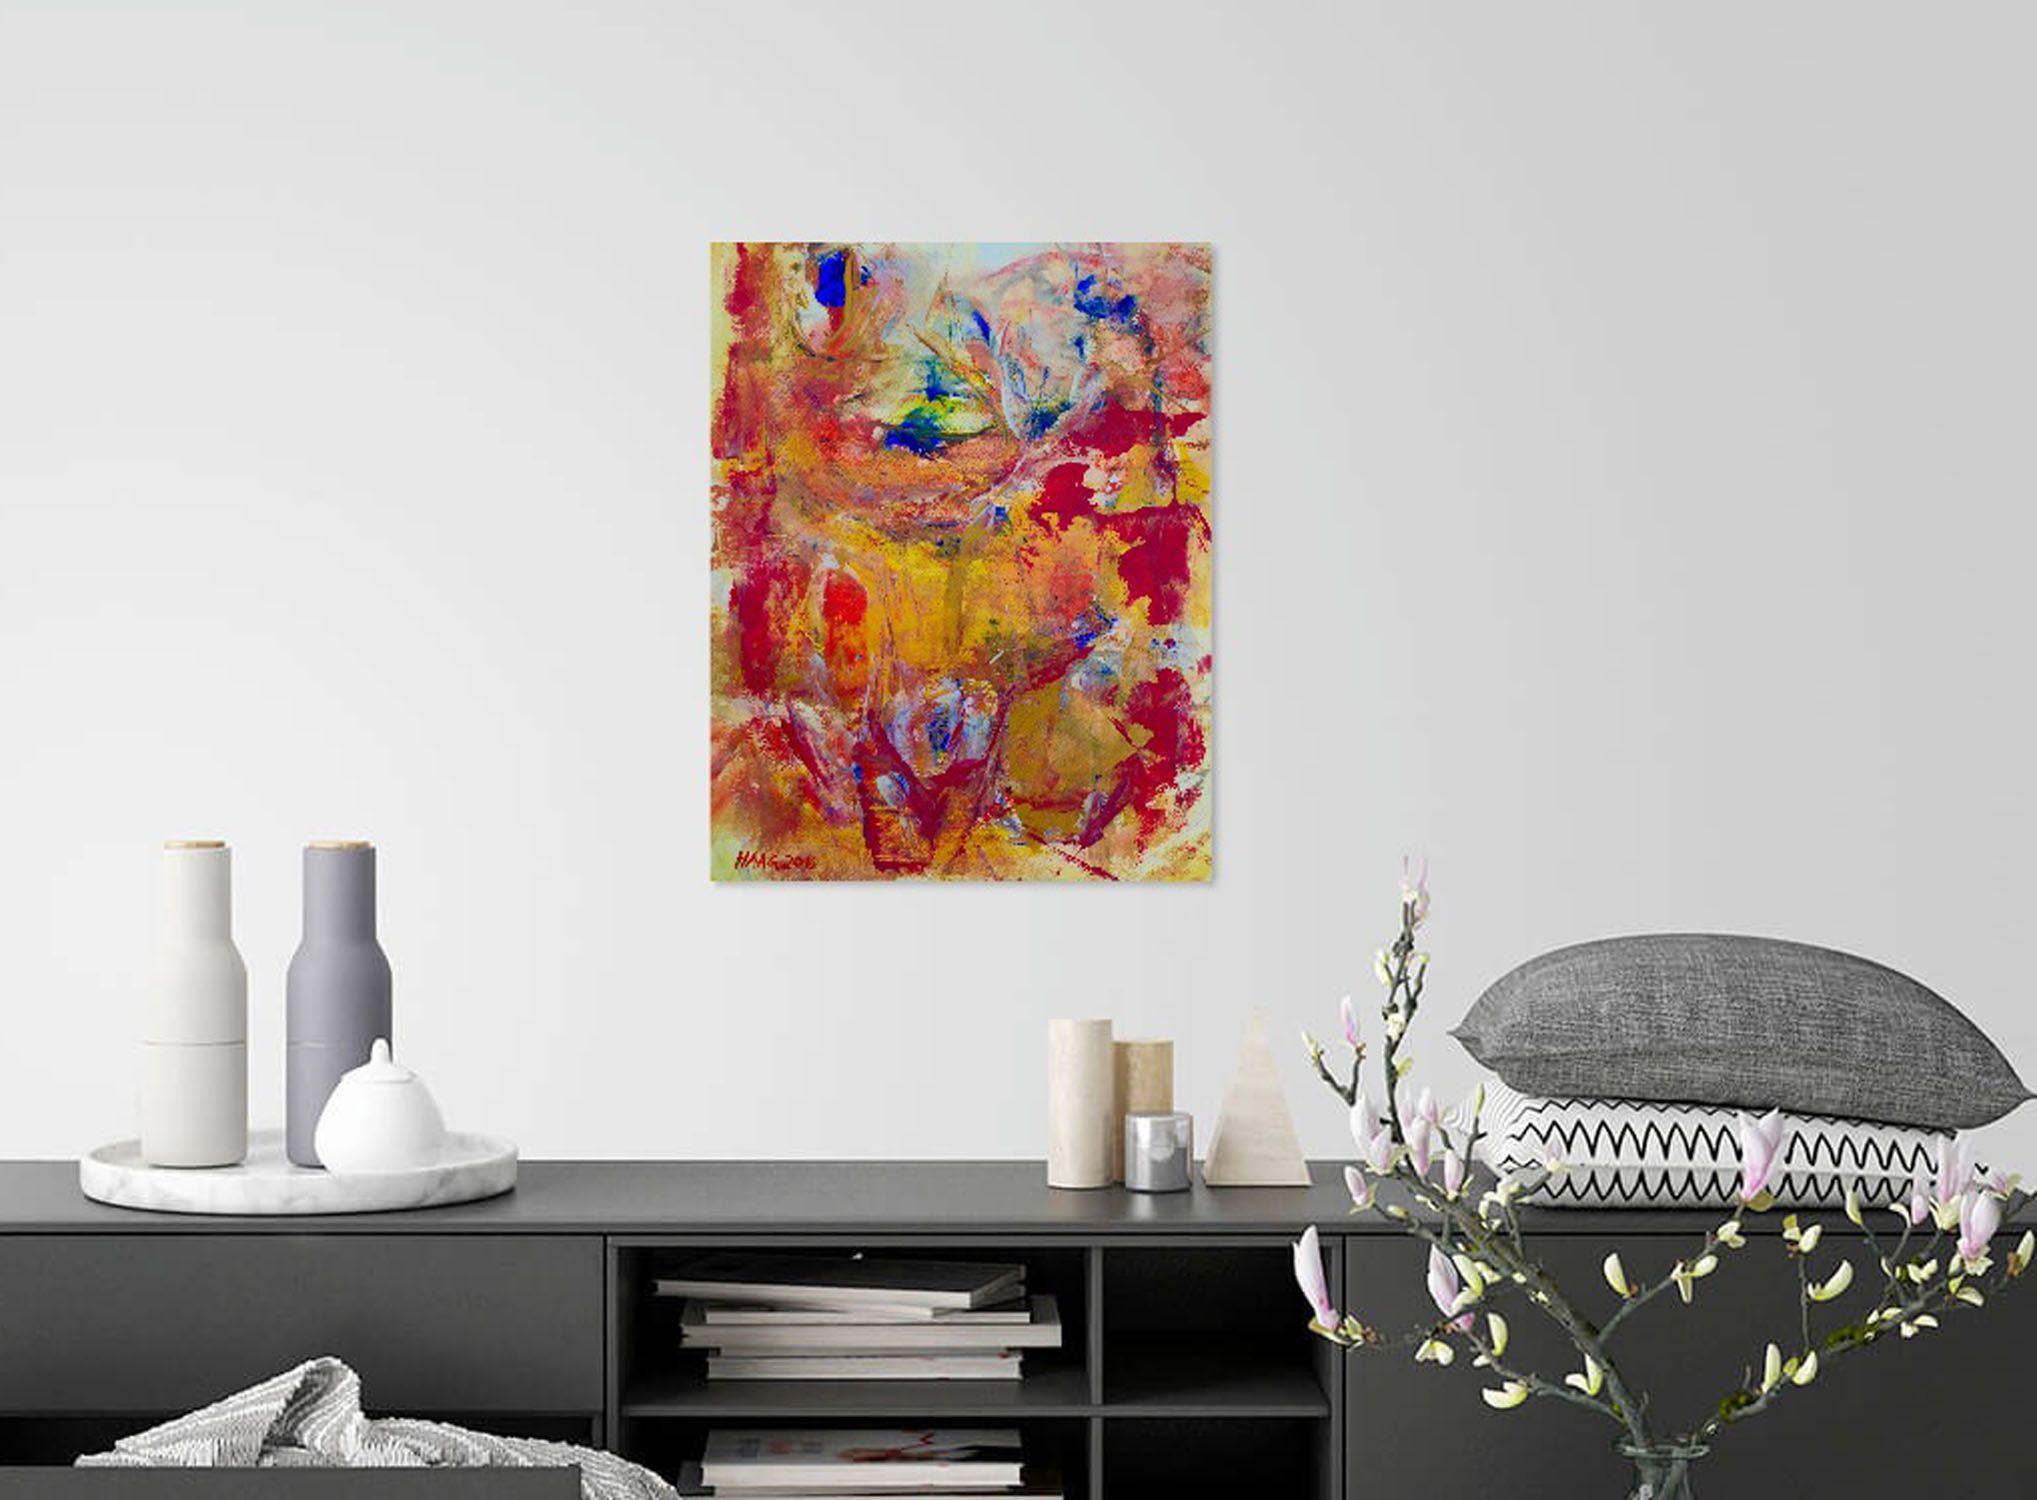 I am a huge fan of ballet. They are such a dedicated and amazingly strong and fit group of people, making ballet look so easy when it is so incredibly hard. My painting is an abstract celebration of balance, beauty and the stillness between